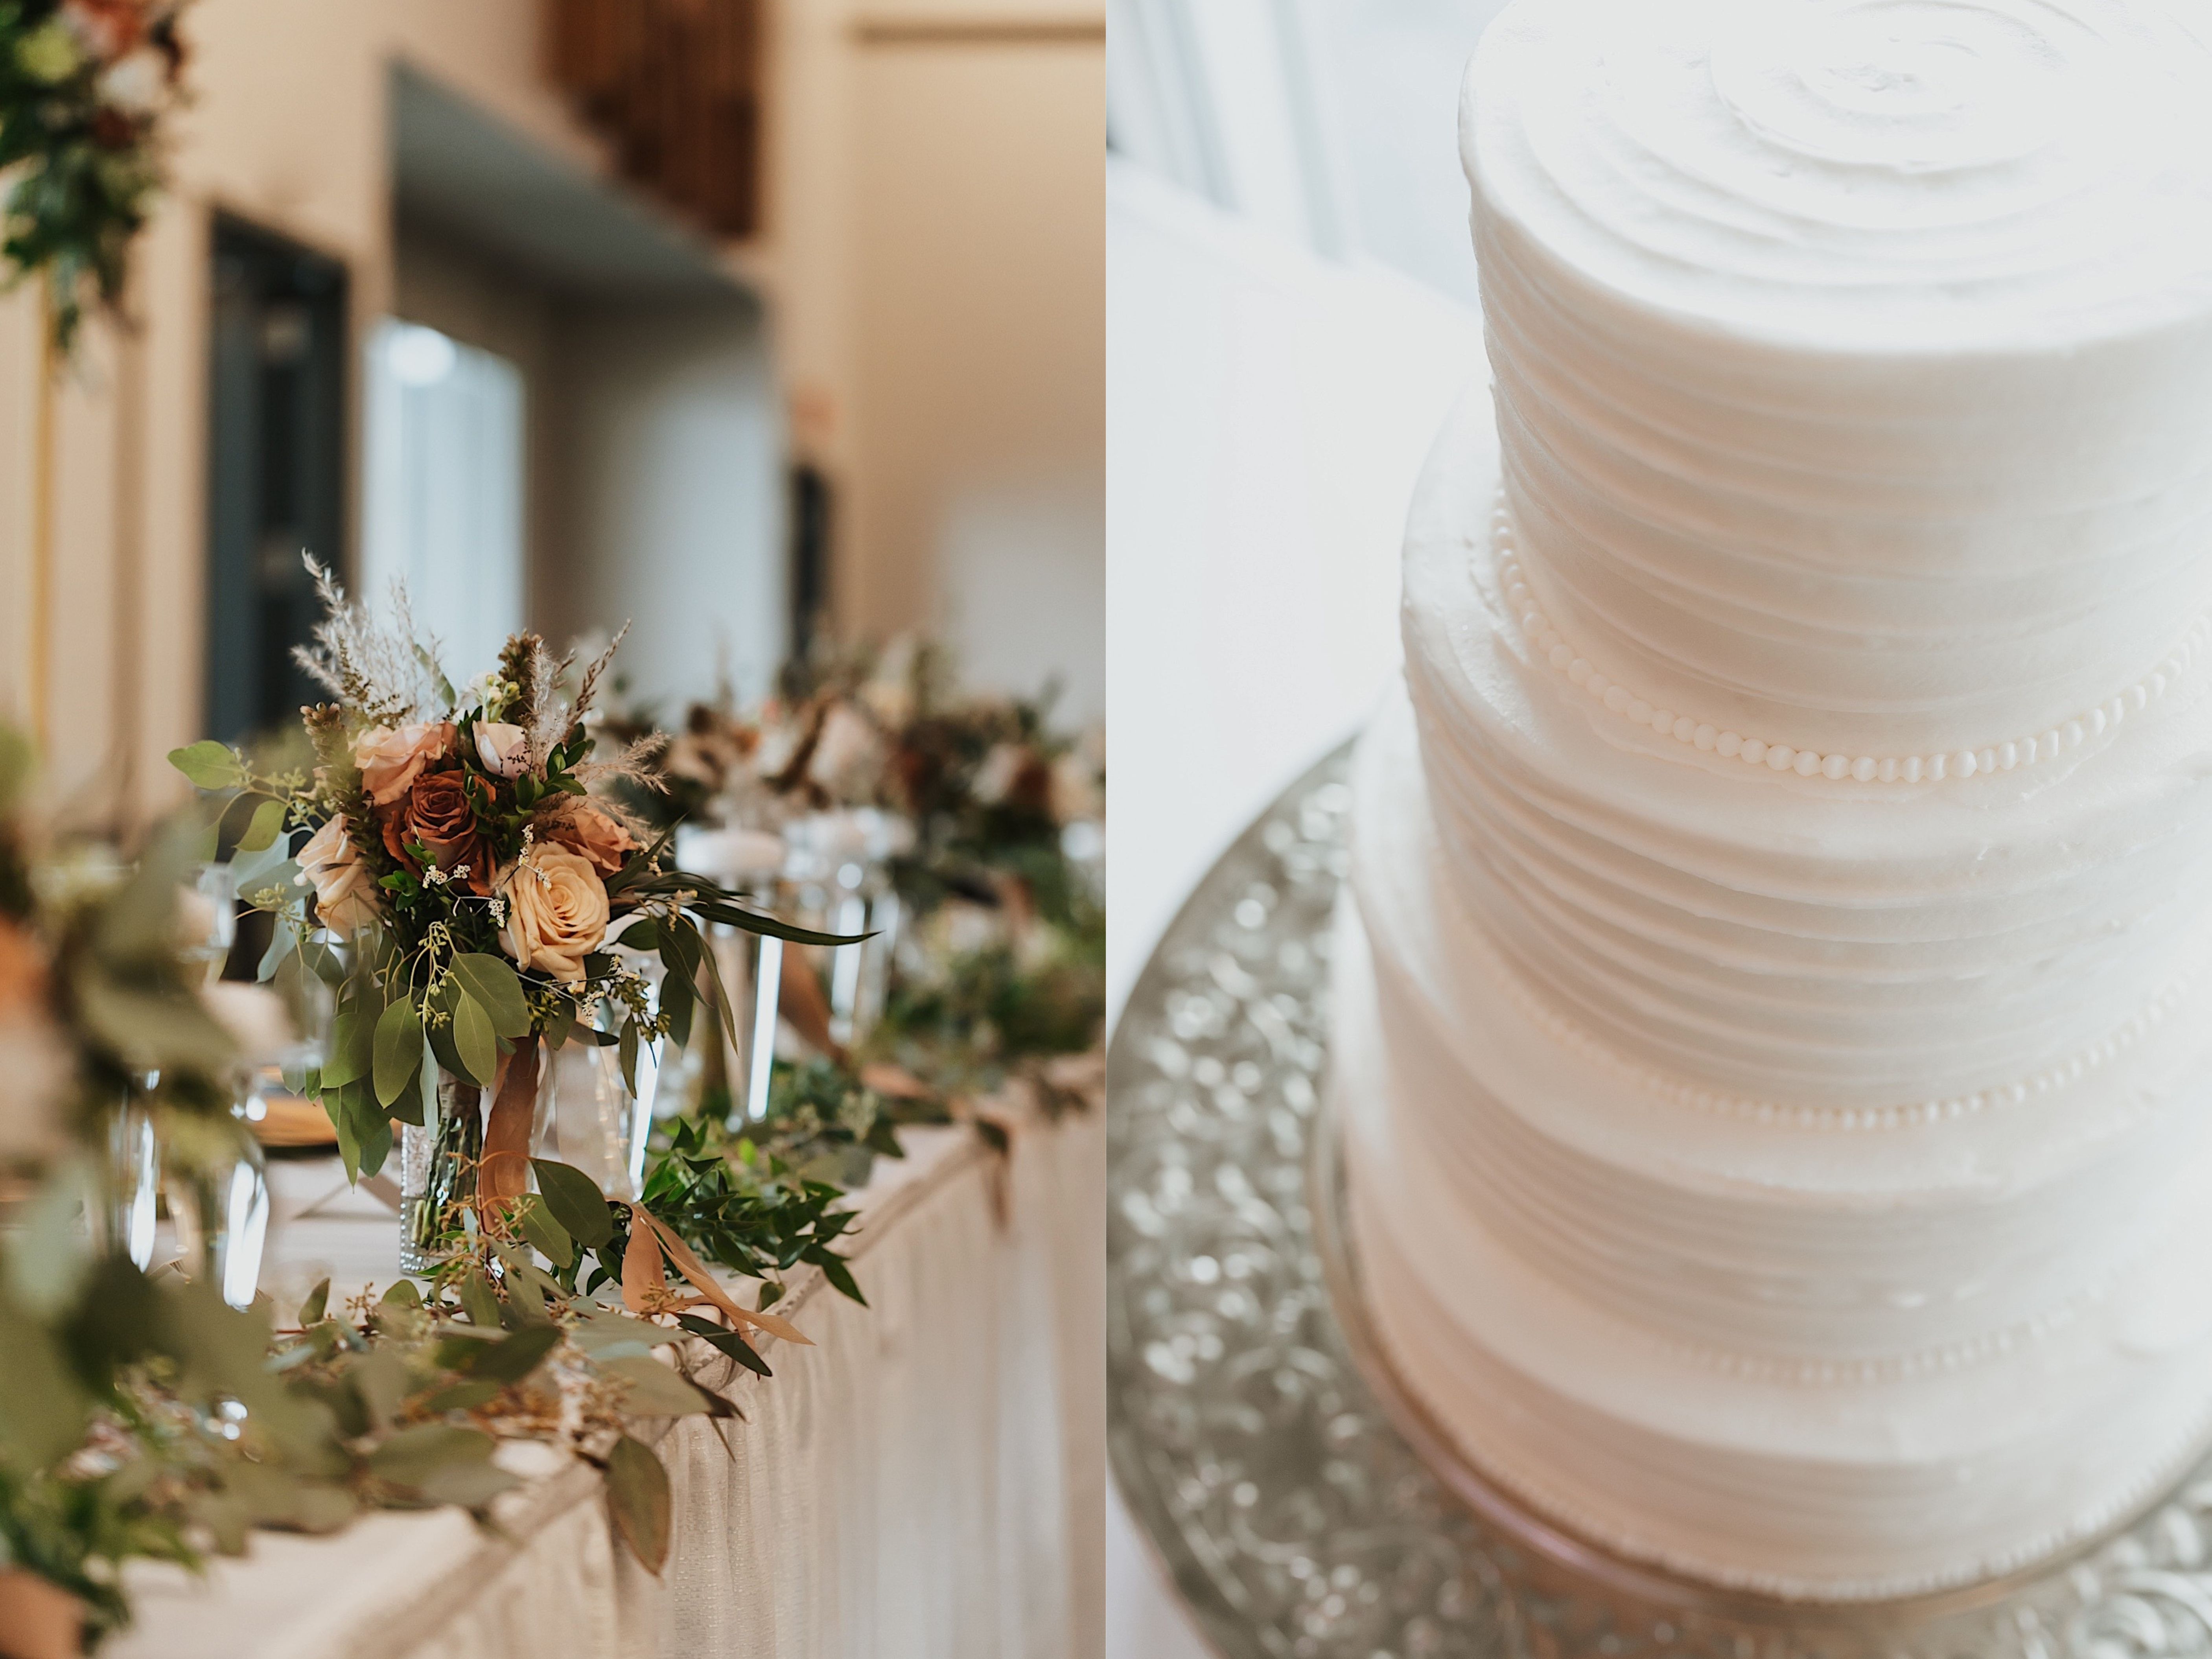 2 photos side by side, both are detail shots the left being florals on a table and the right being a wedding cake